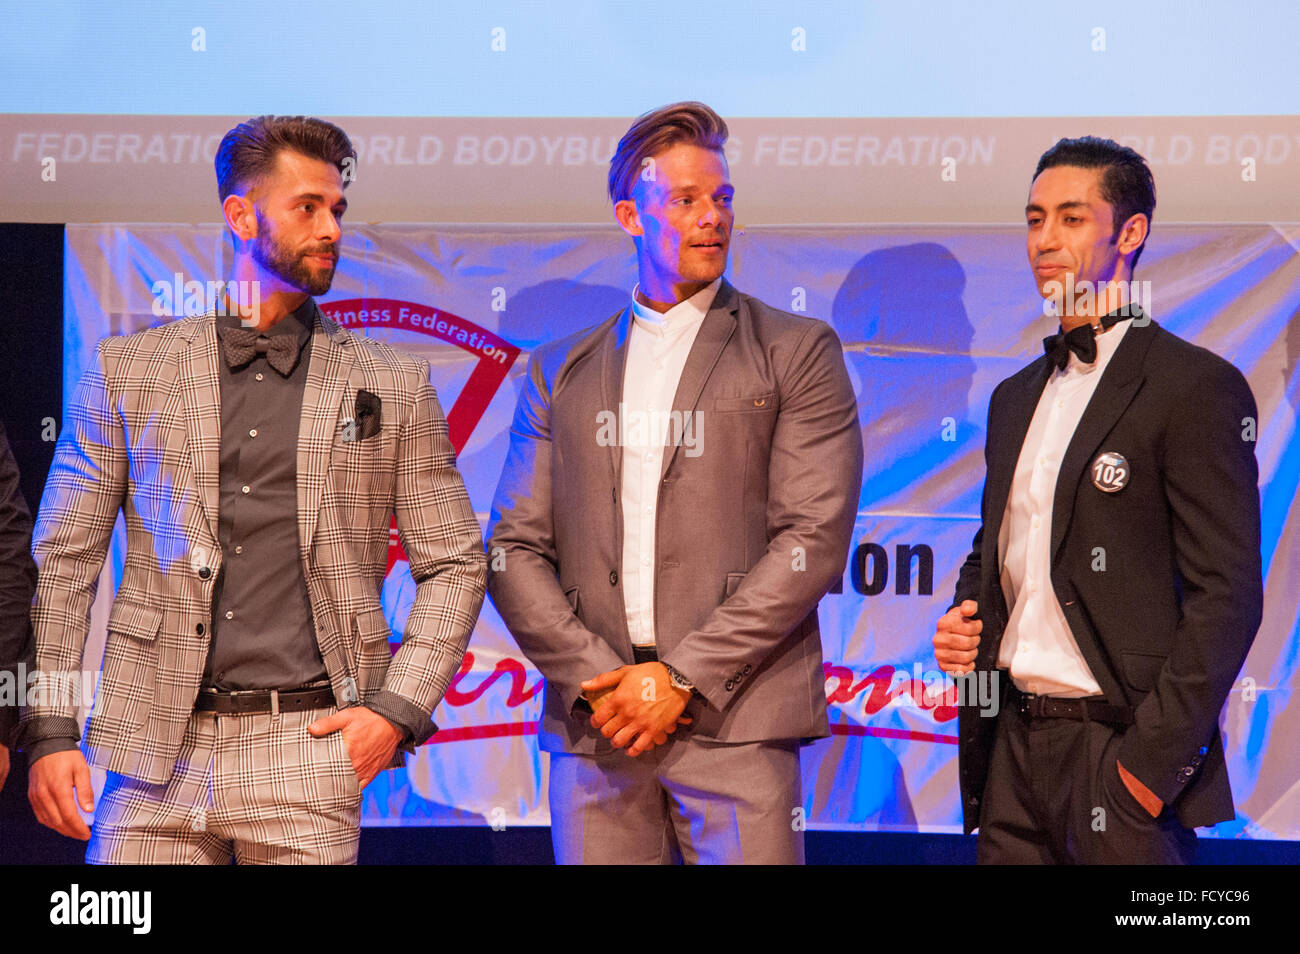 MAASTRICHT, THE NETHERLANDS - OCTOBER 25, 2015: Male fitness models Ali Dalili from Iran, Maxime Maurissen and Joy Flex dressed  Stock Photo